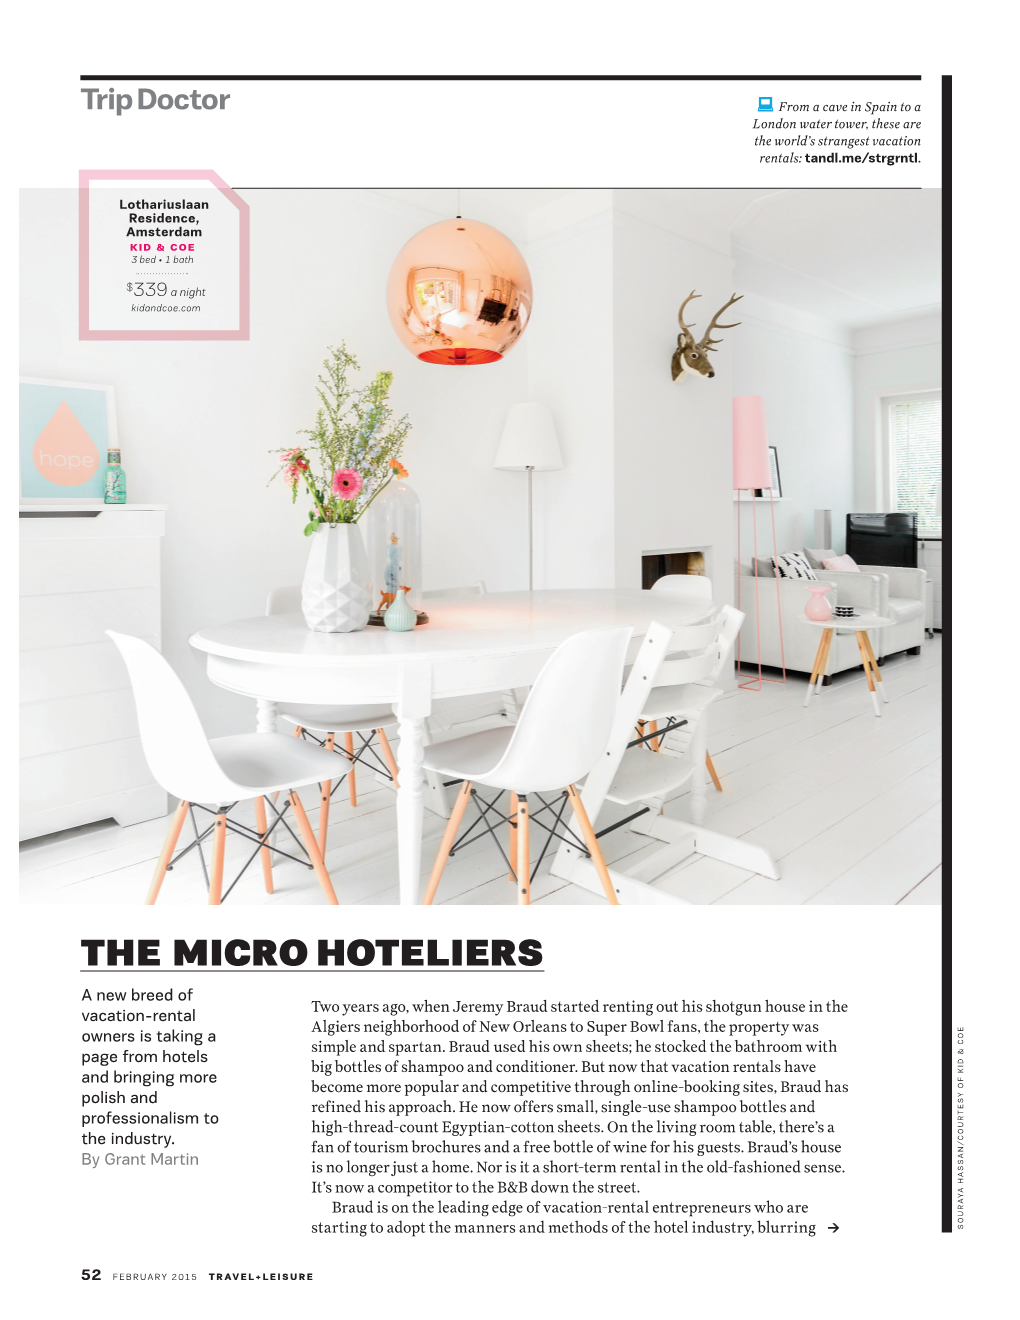 The Micro Hoteliers